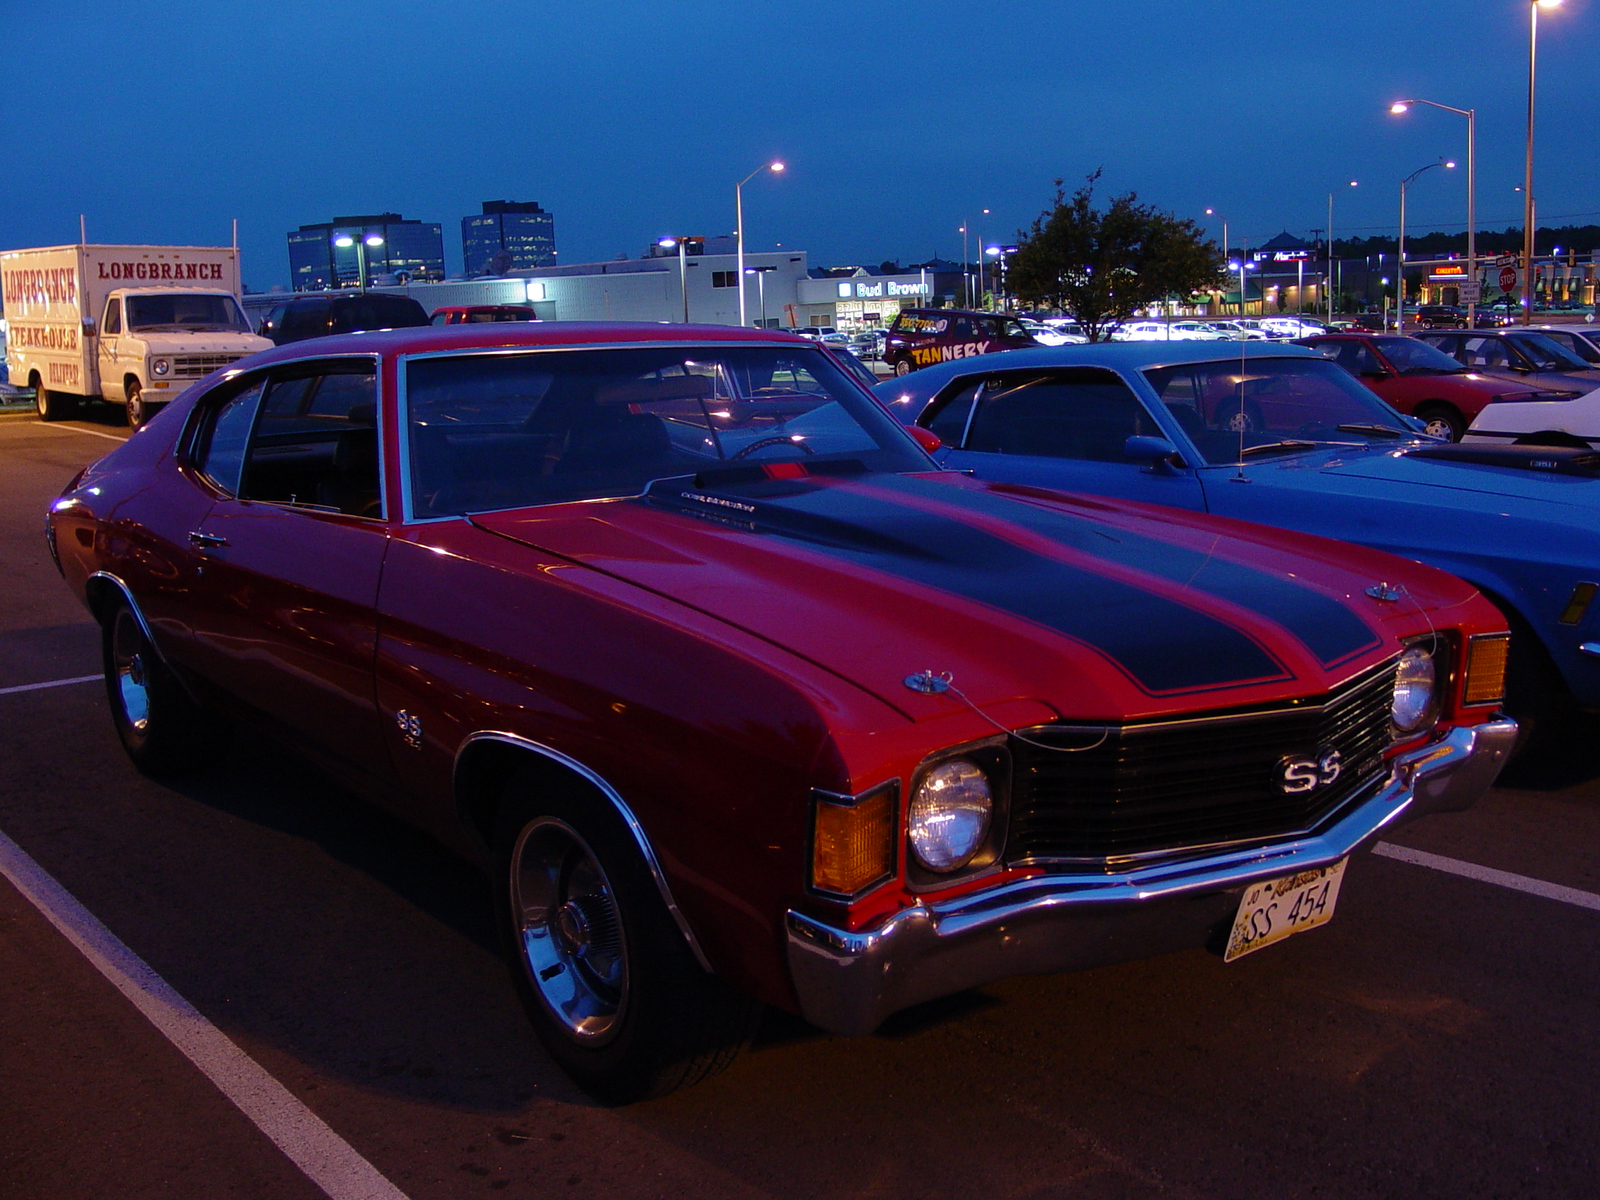 Chevelle Ss By Silelinct